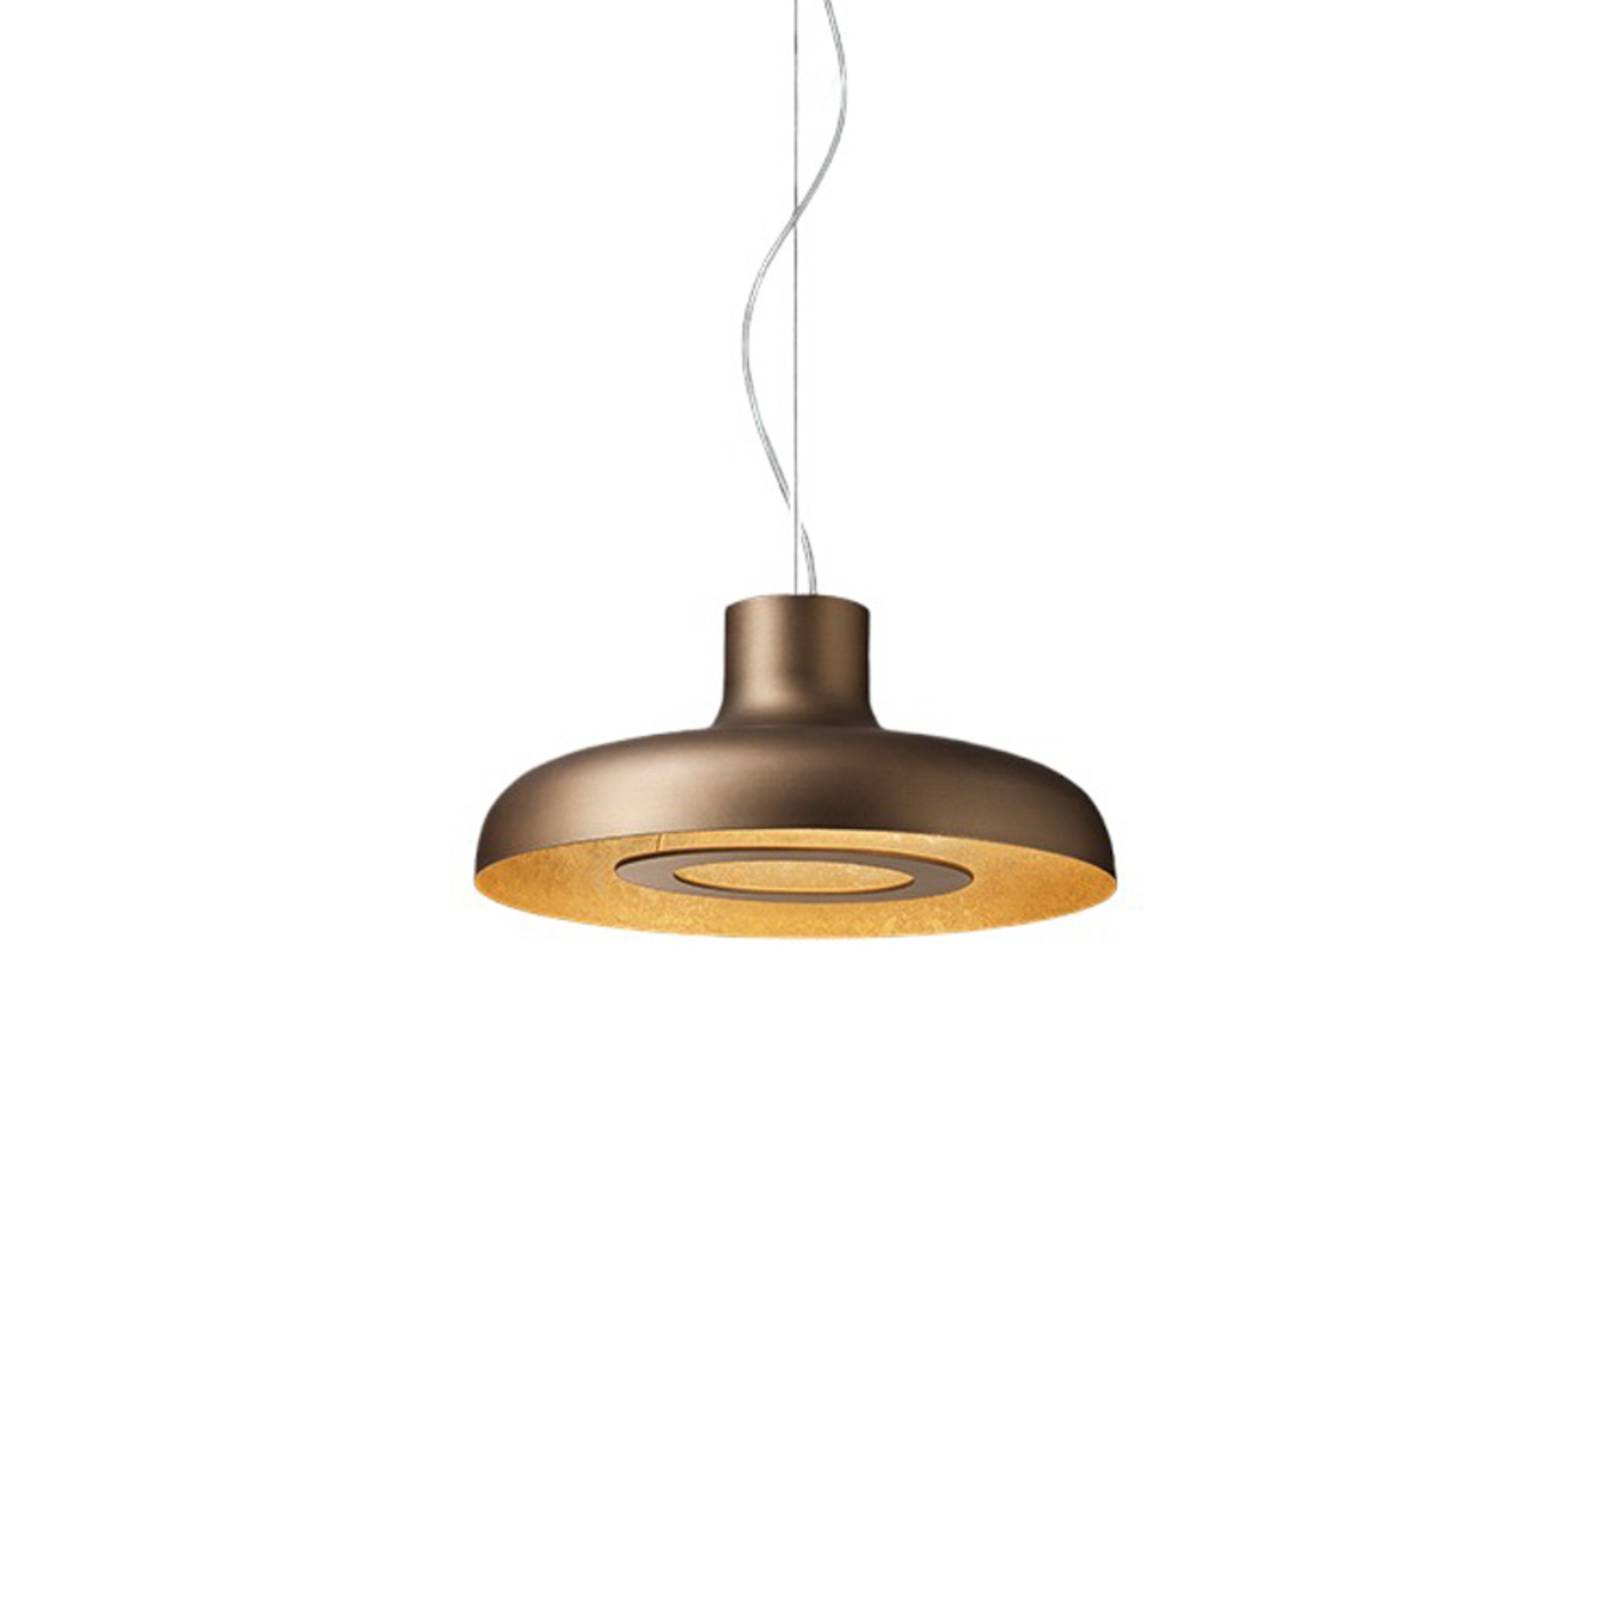 ICONE Duetto LED-hængelampe 927 Ø55cm bronze/guld